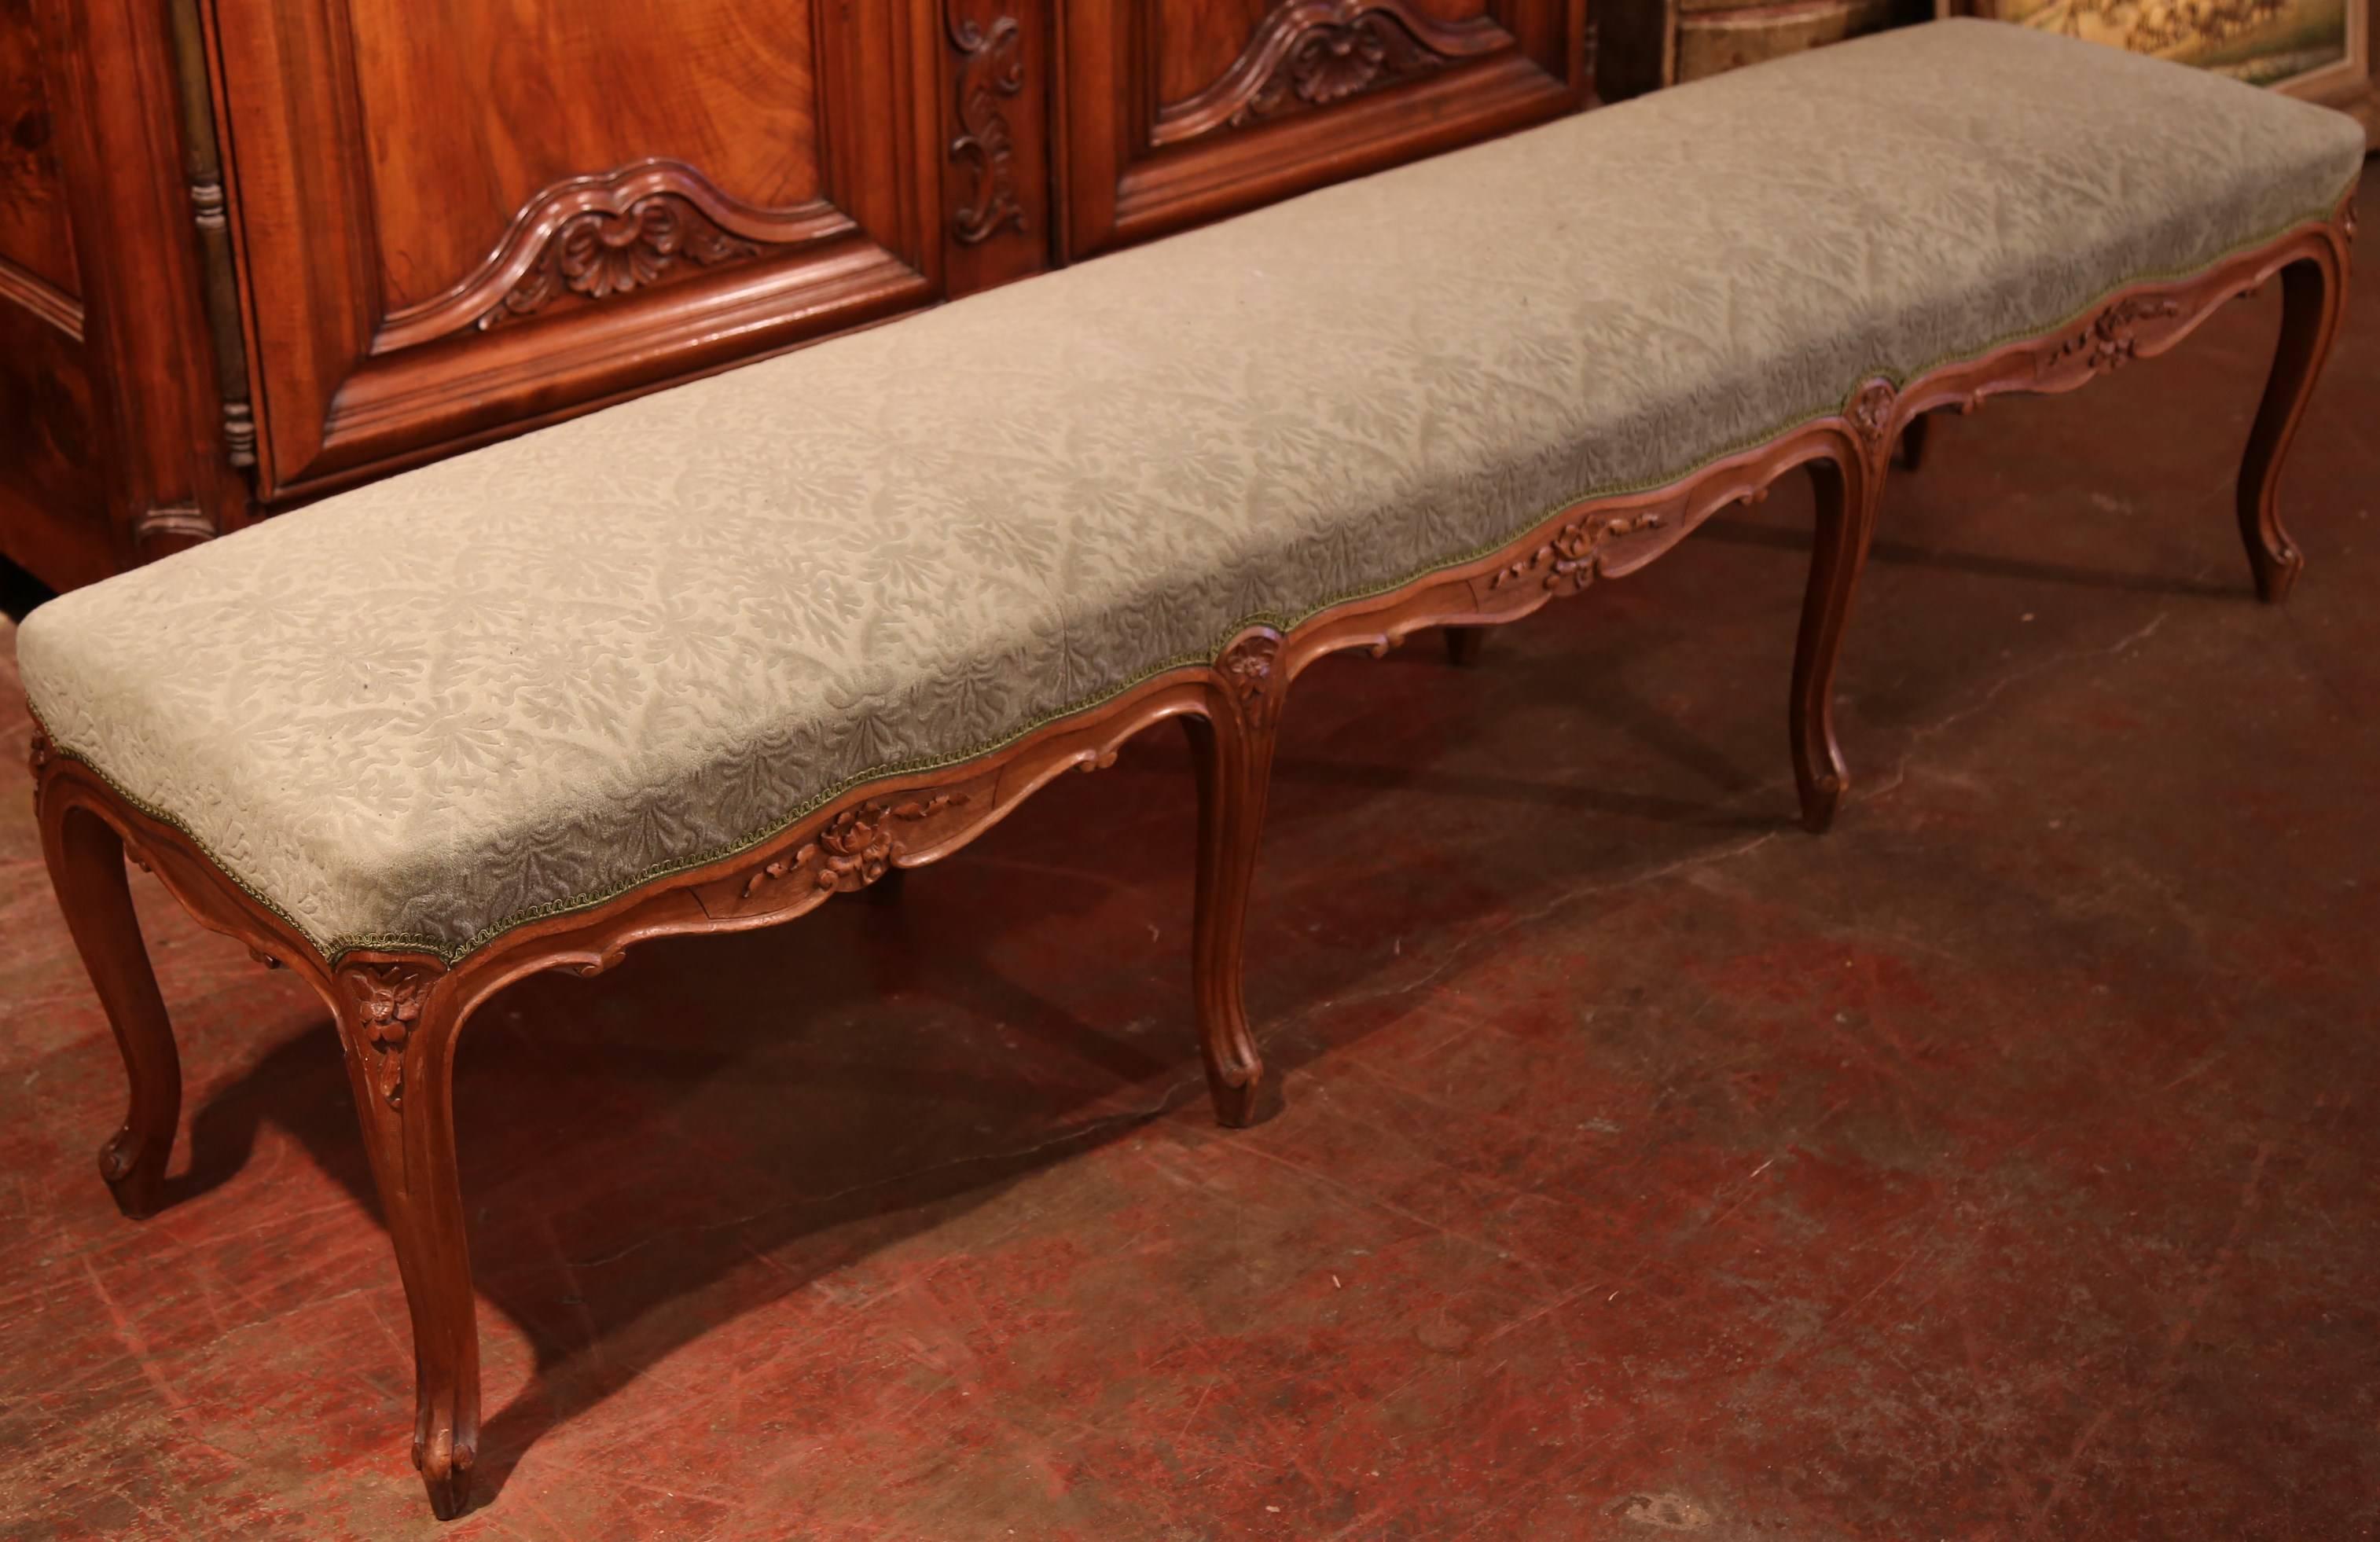 Incorporate elegant seating into your entryway or bedroom with this antique fruitwood bench. This bench without back were created in Paris, France, circa 1880 and feature eight cabriole legs and a carved apron on both sides. The bench is upholstered